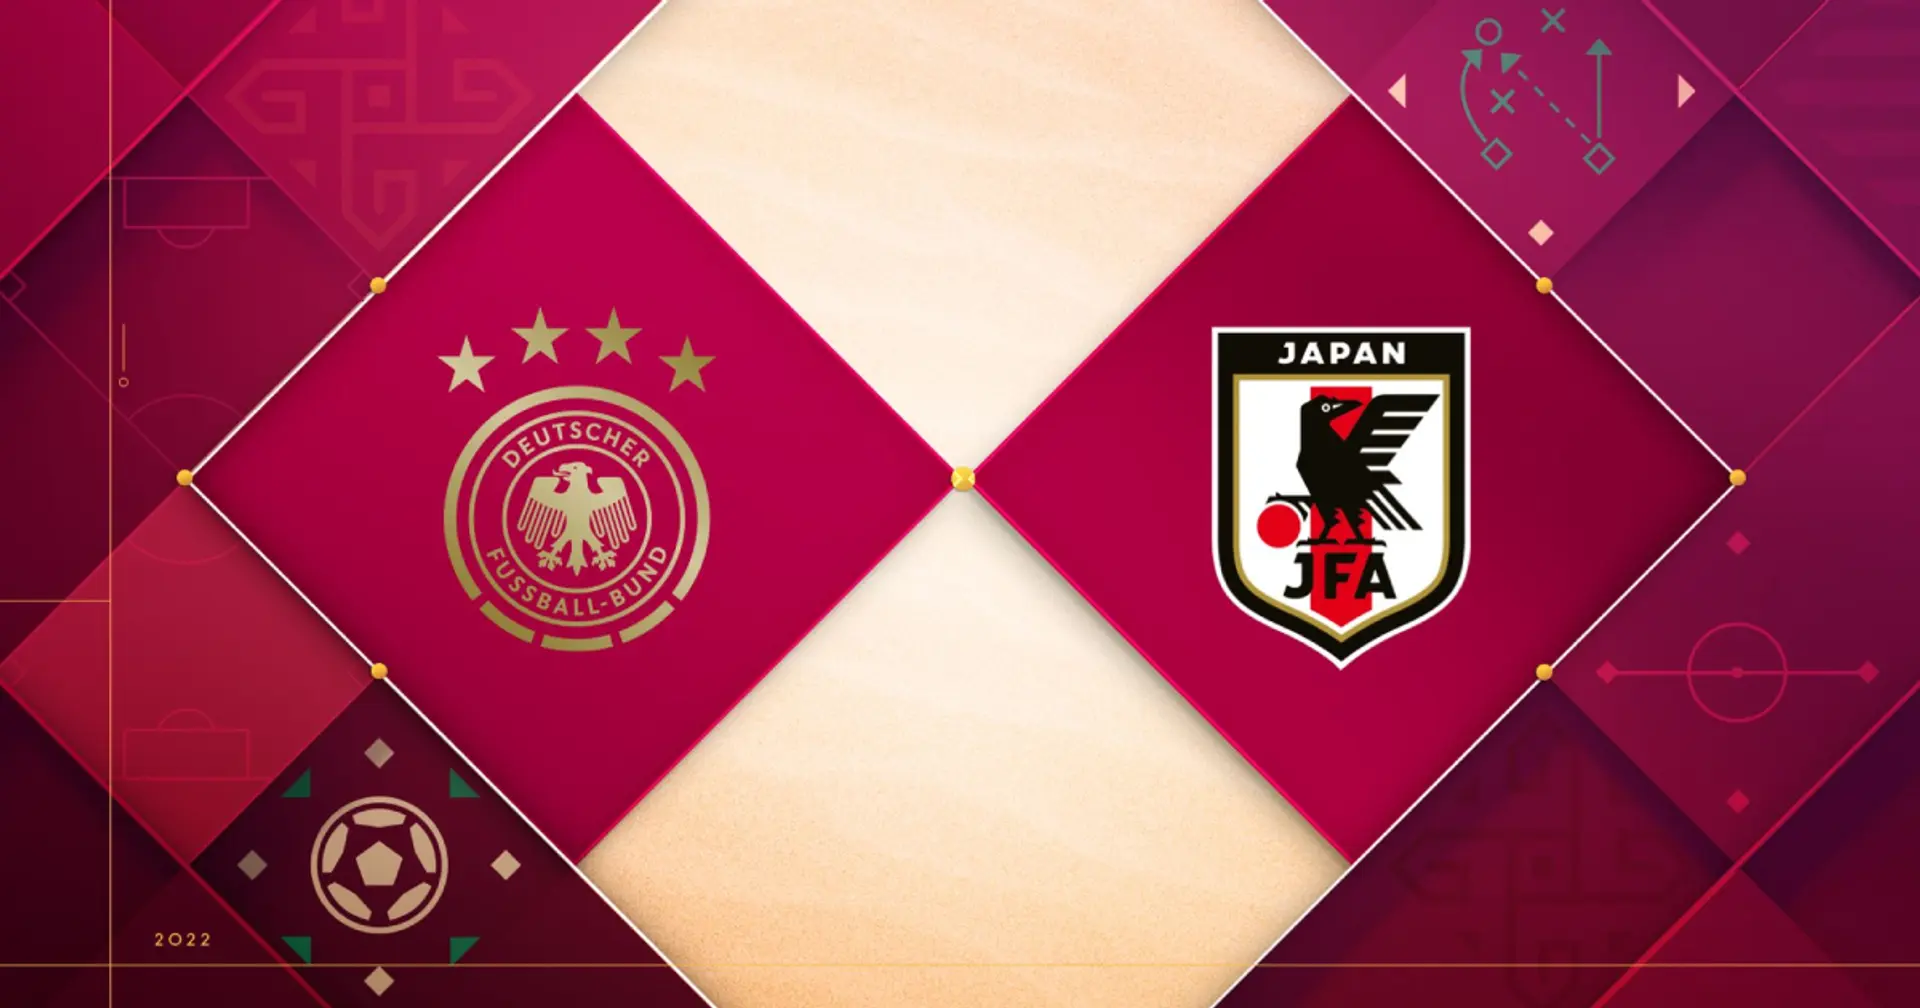 Germany vs Japan: Official team lineups for the World Cup clash revealed